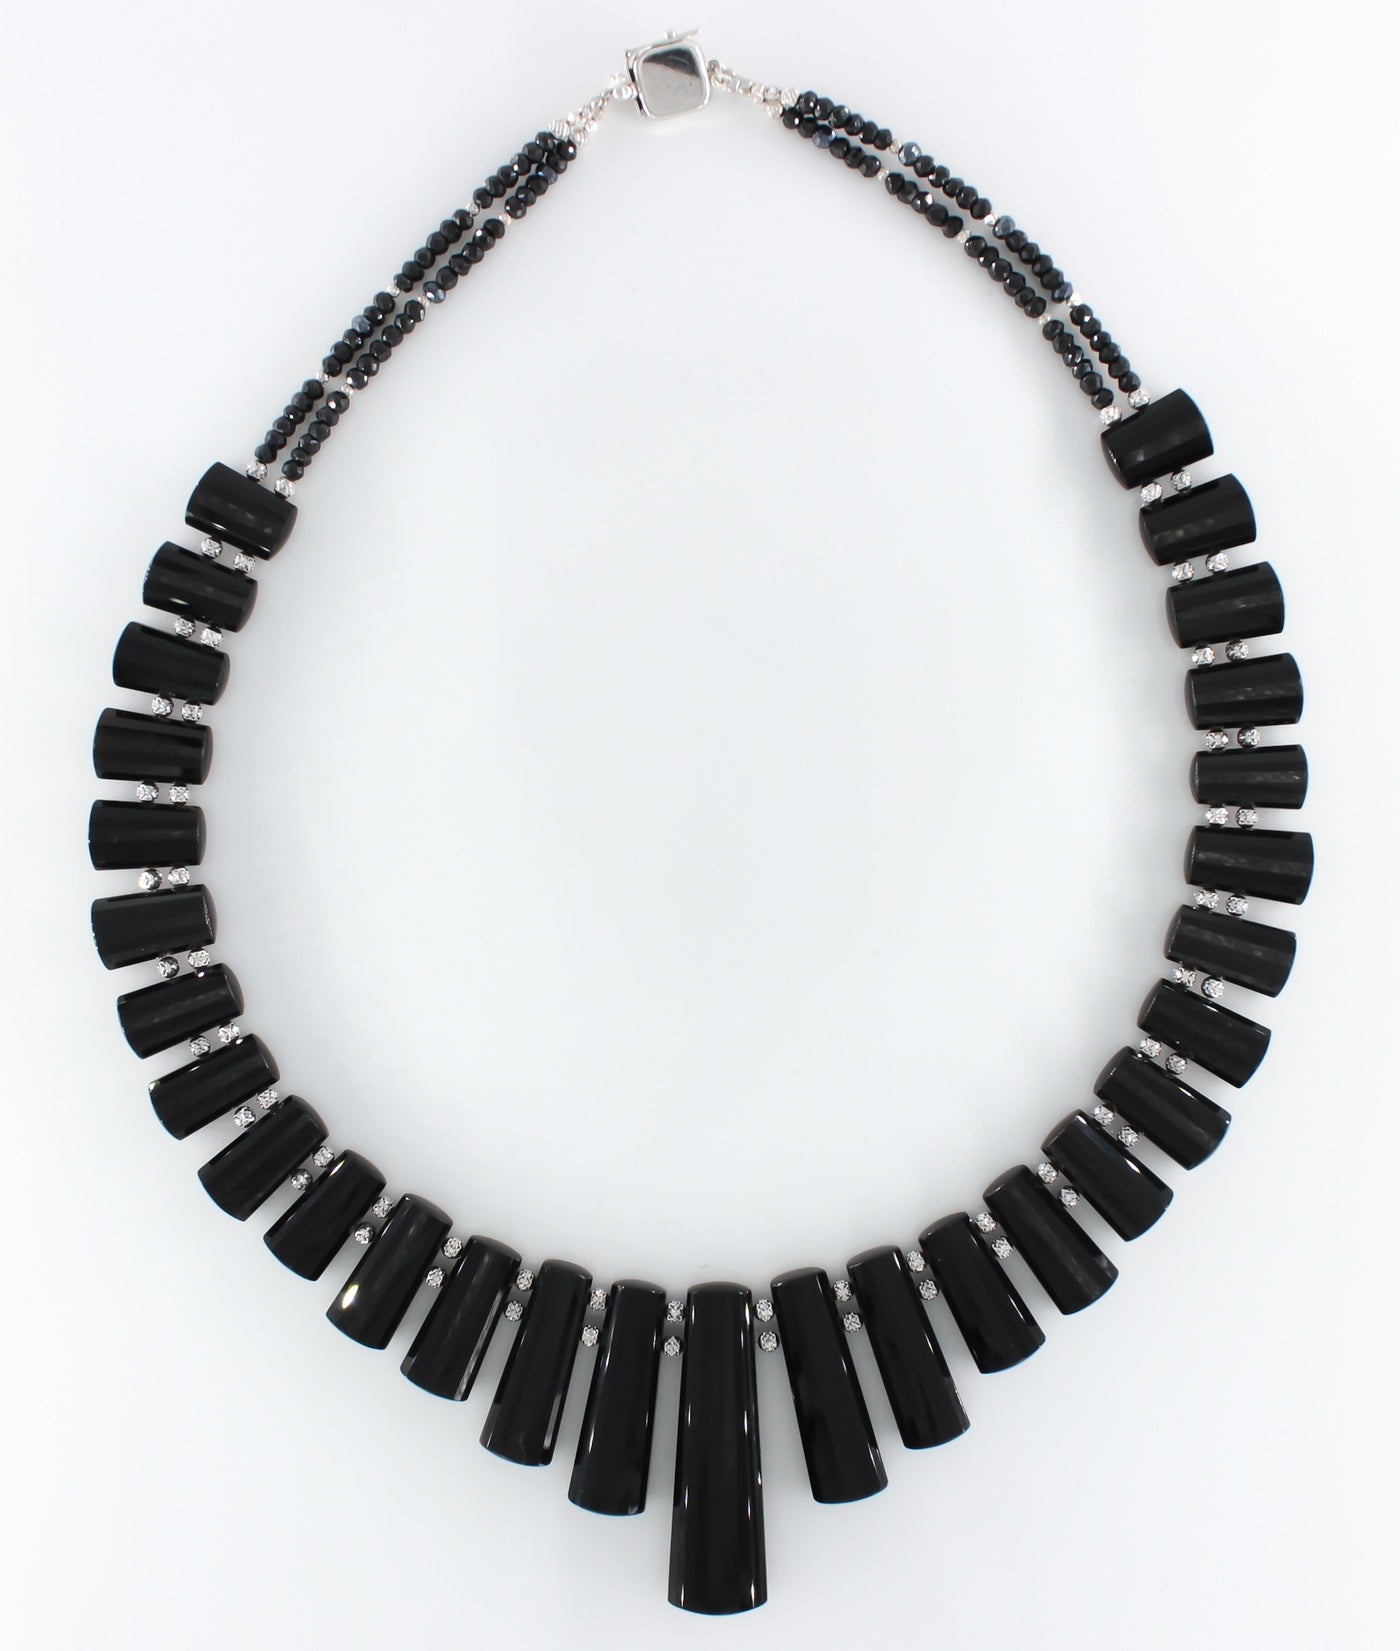 Graduated Black Onyx and Spinel Necklace